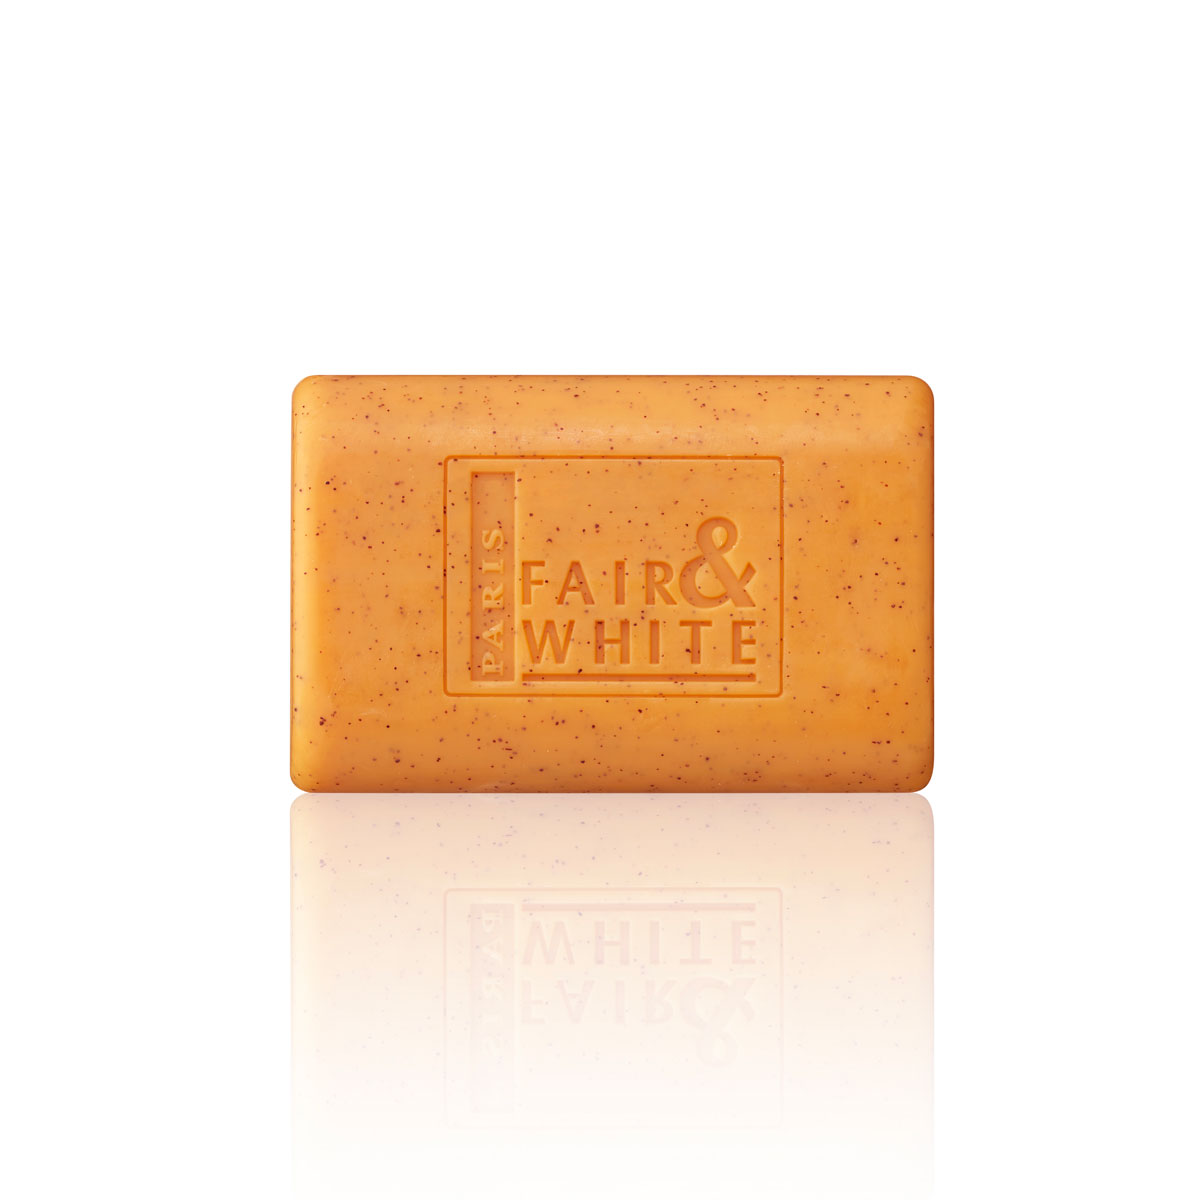 Exfoliating Soap - Carrot - Limited Edition | Original